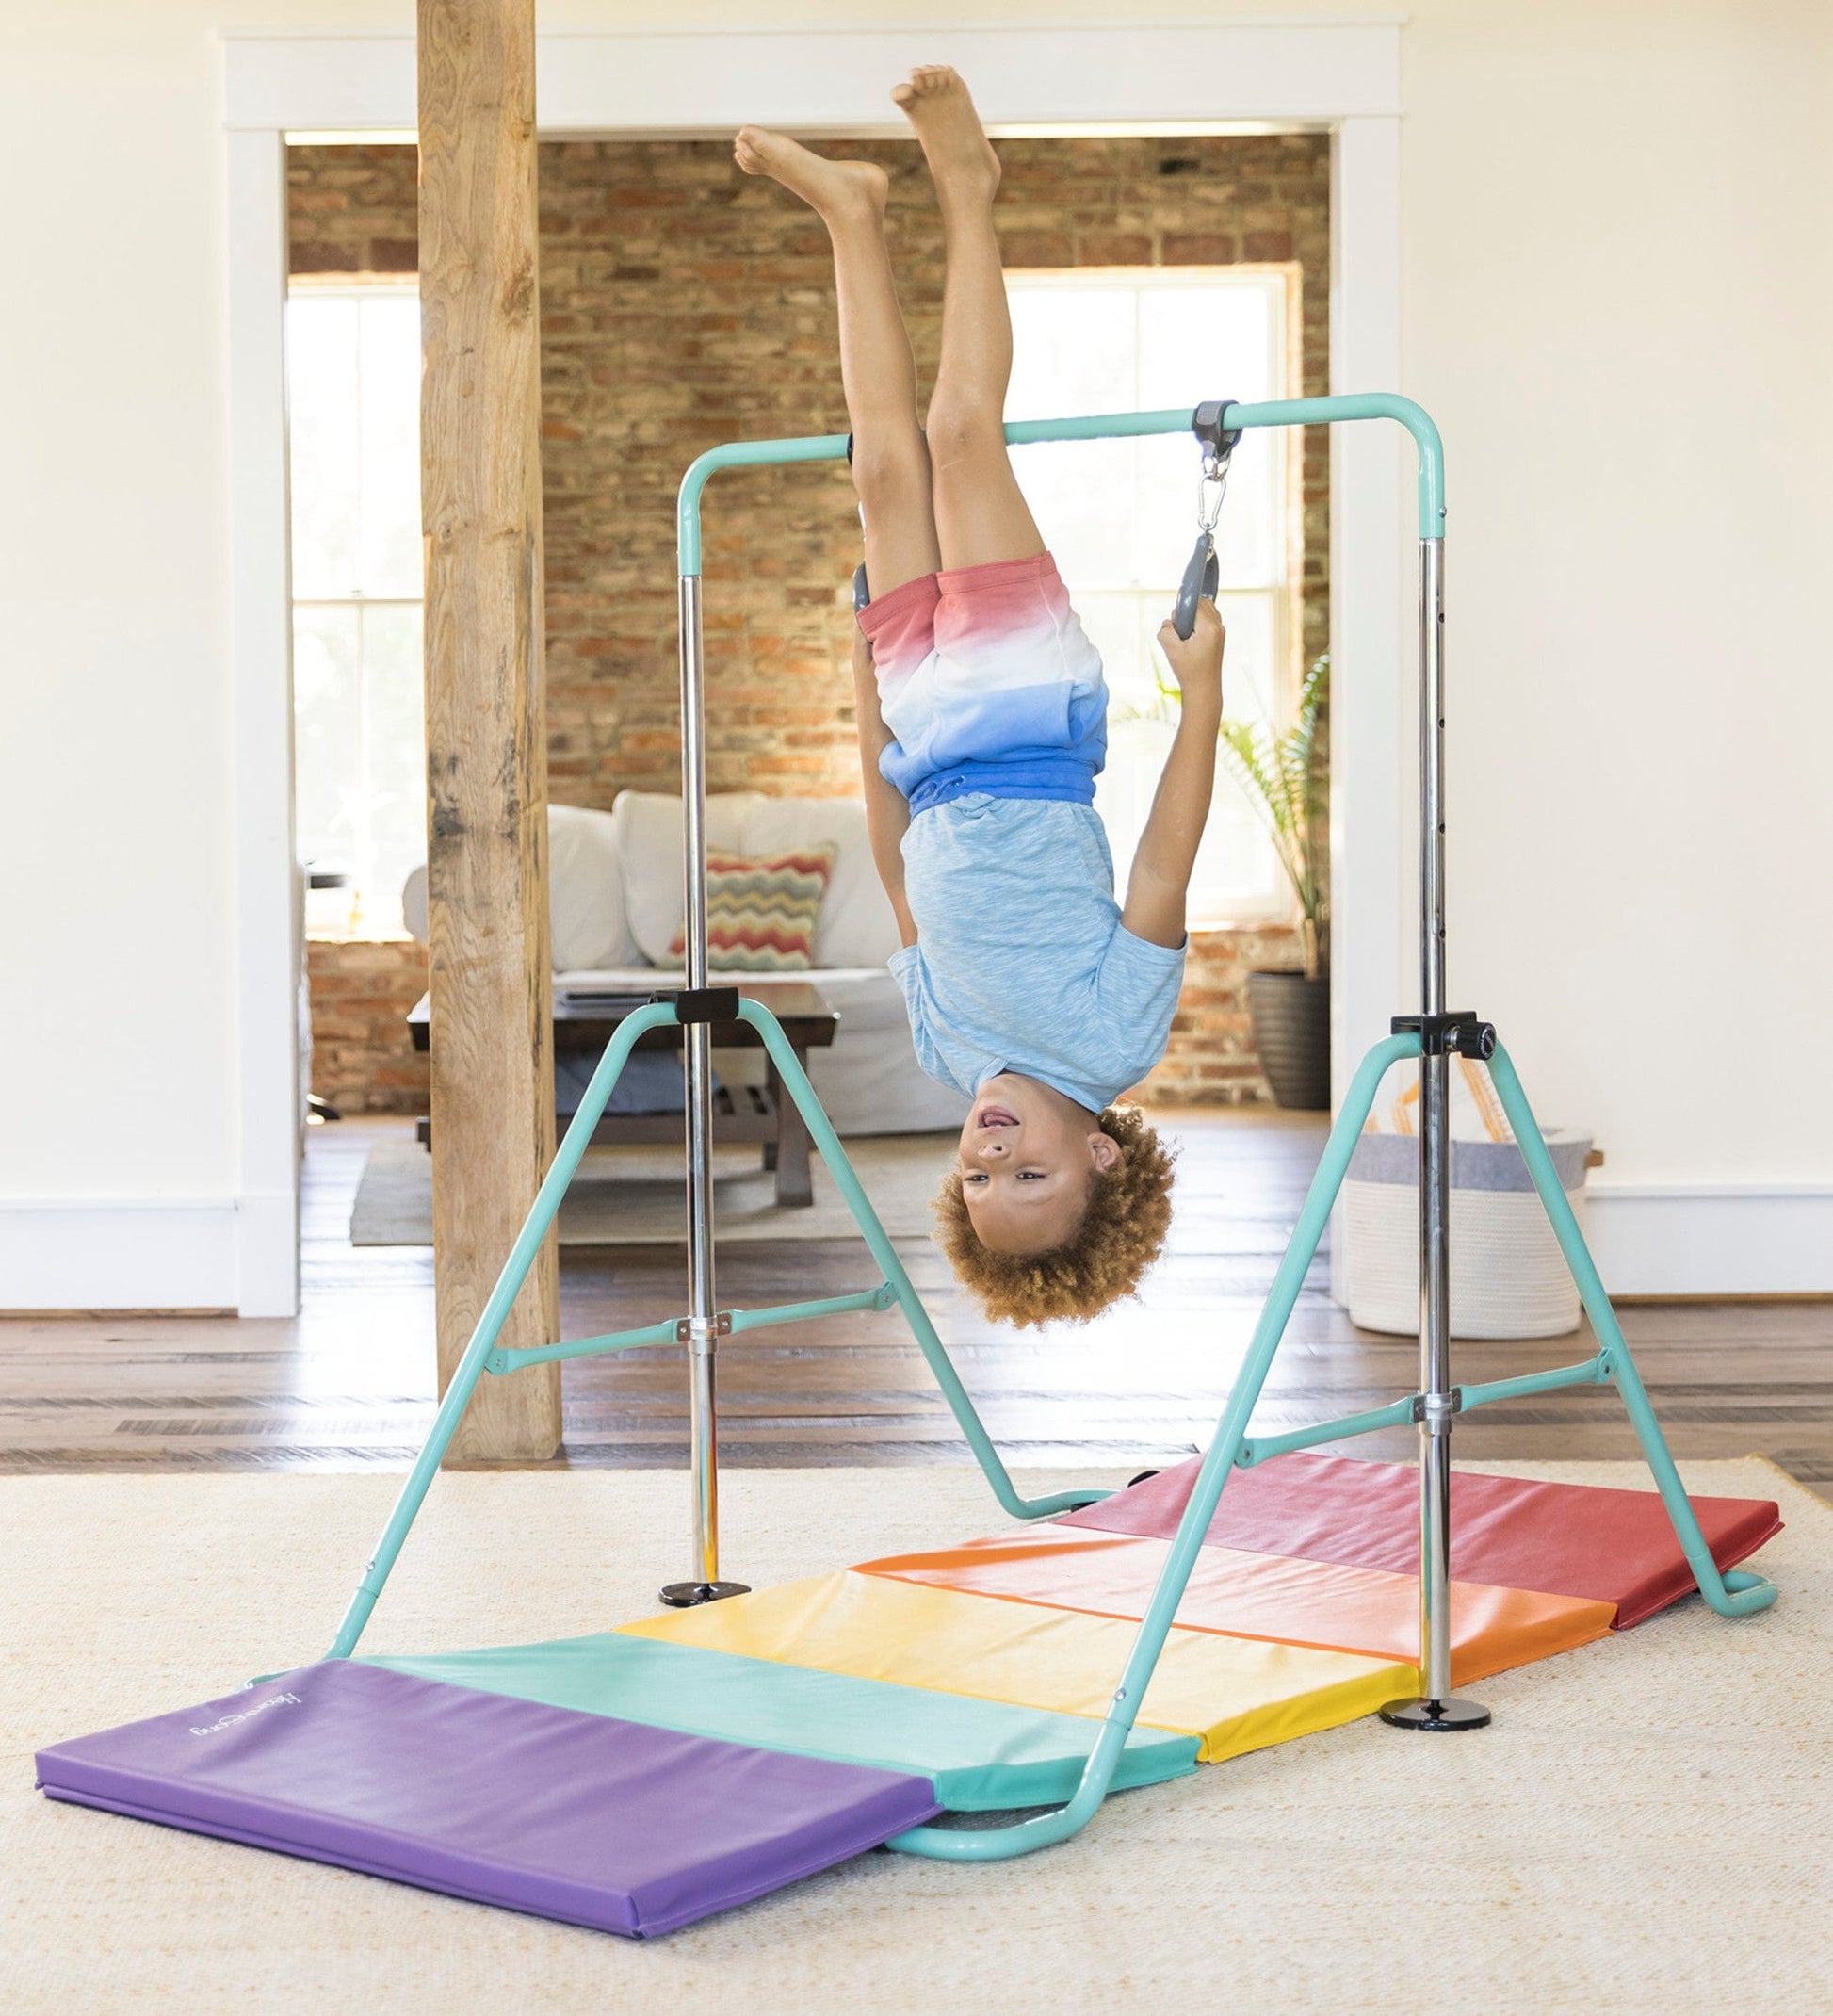 Best Gymnastics Bars For Home: What To Look For 